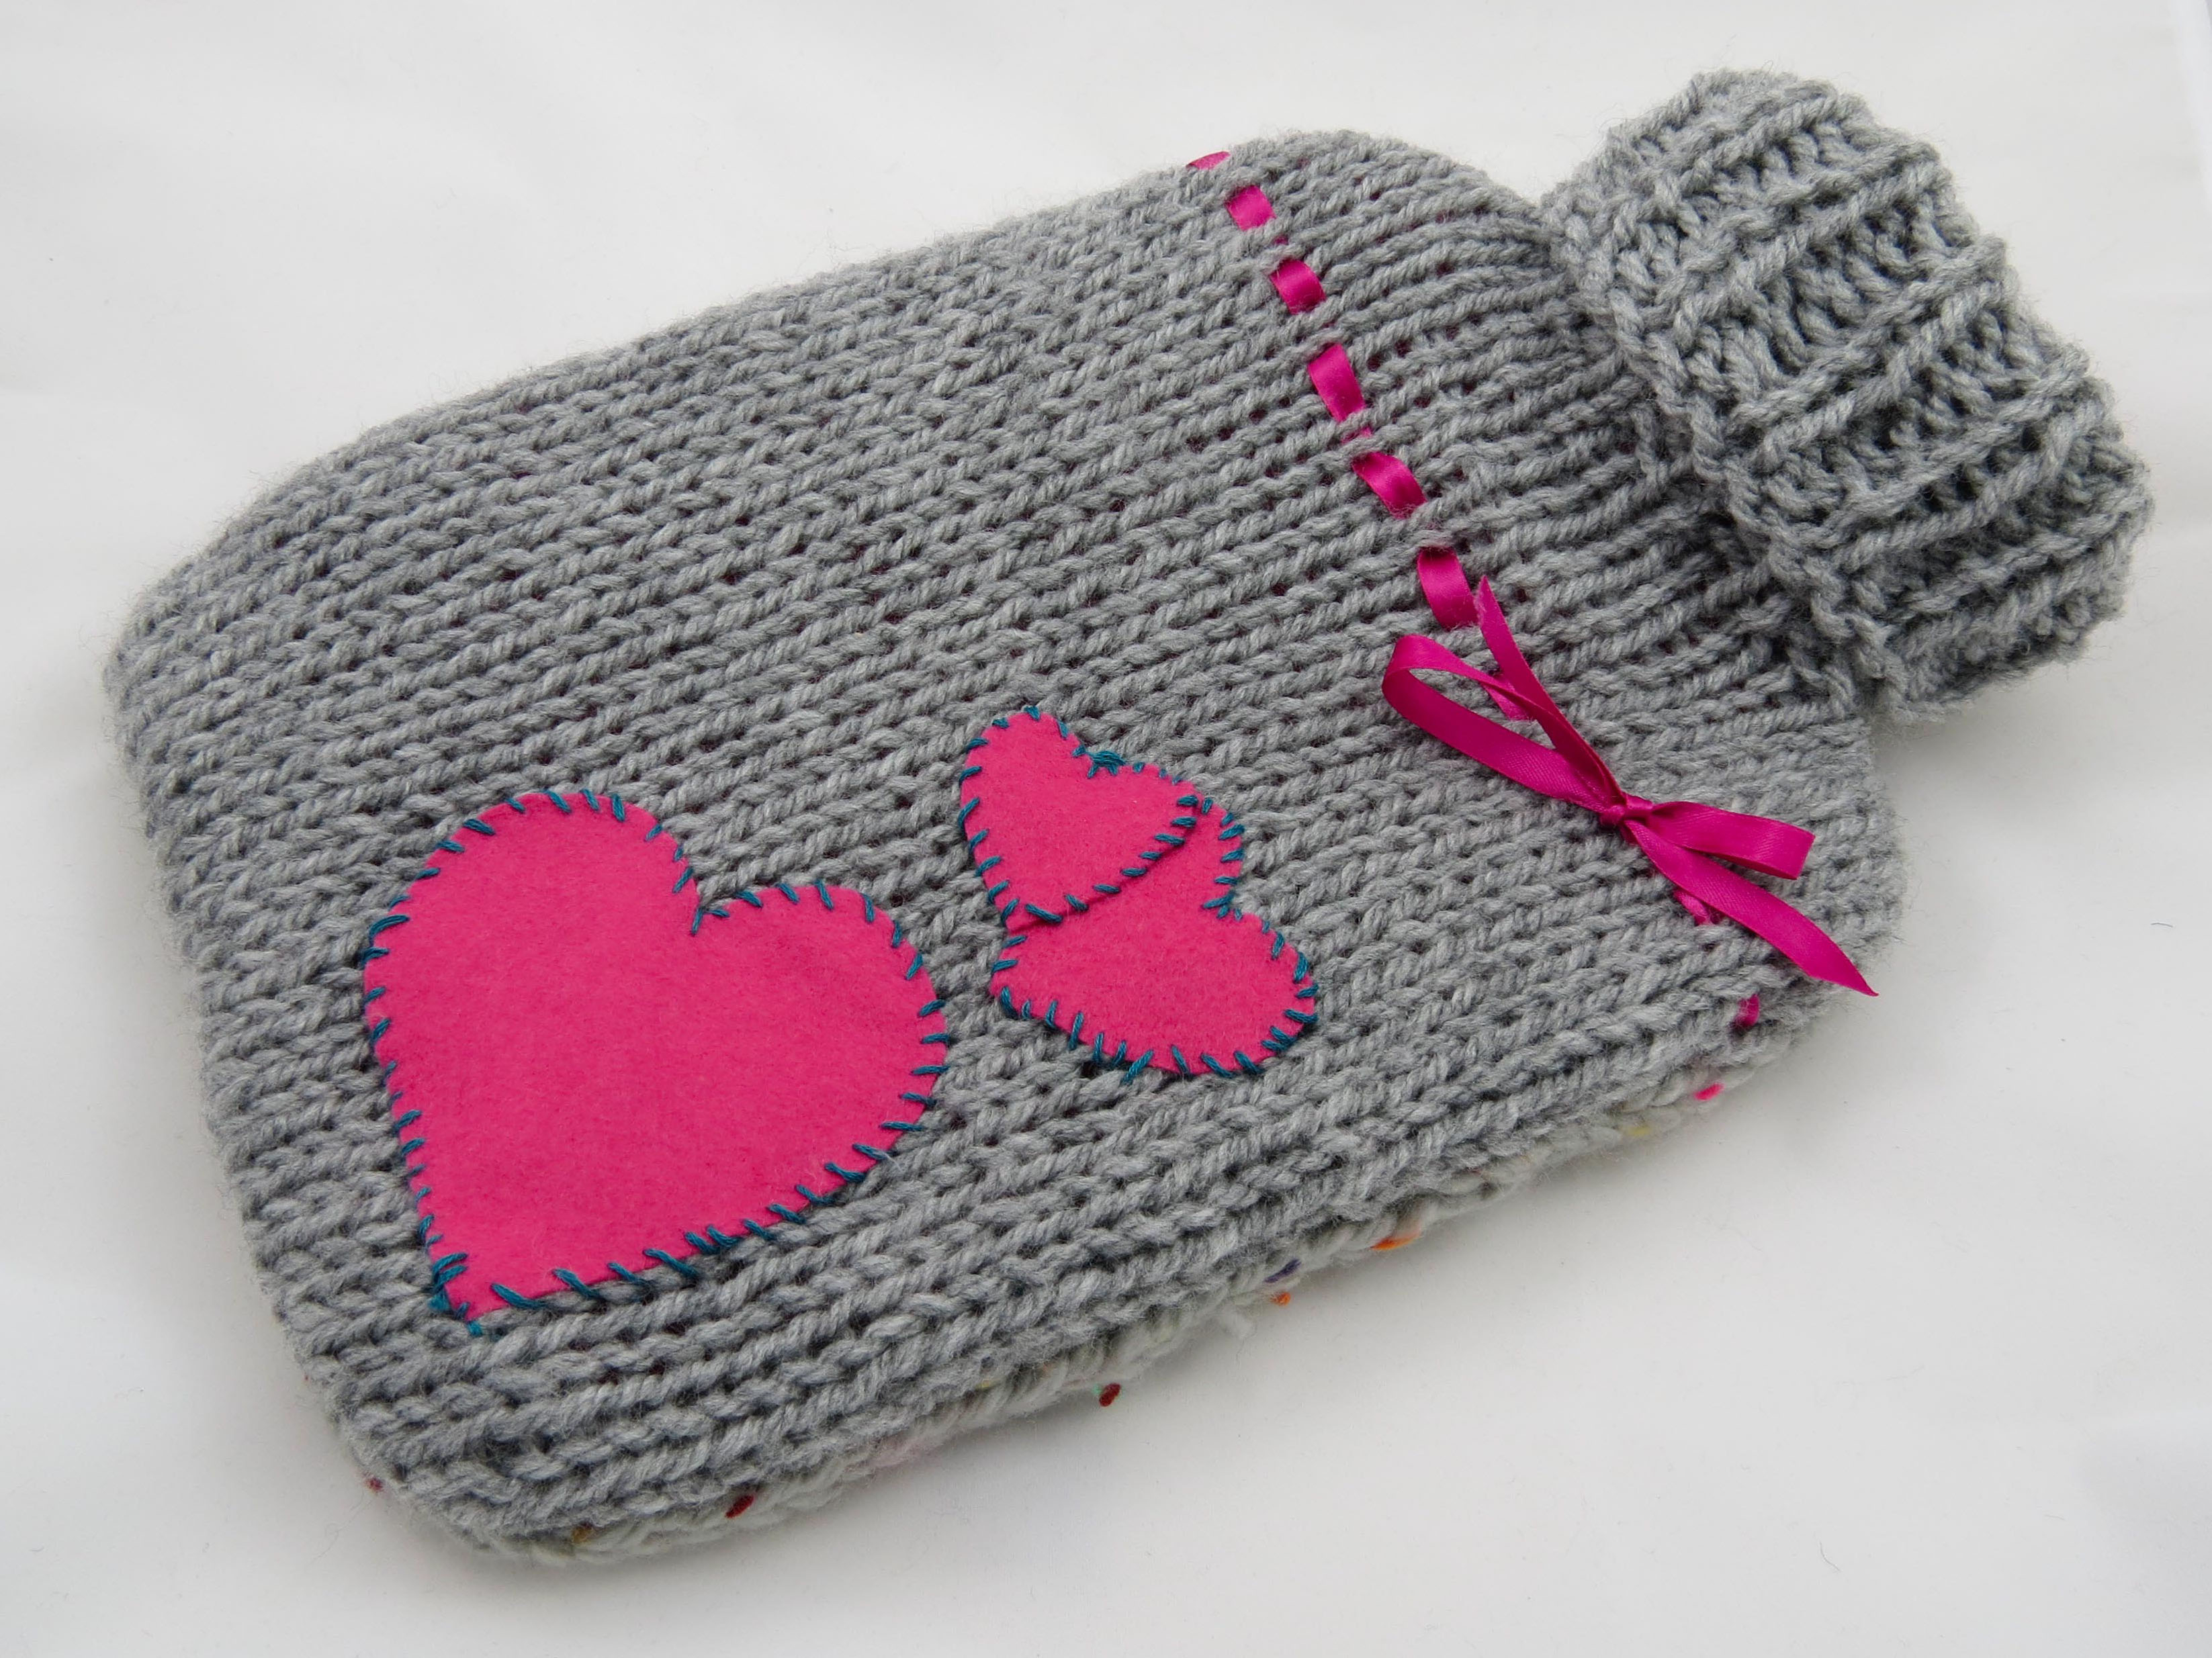 Free Knitting Patterns For Beginners Uk 8 Ply Free Knitting Pattern For Hot Water Bottle Cover